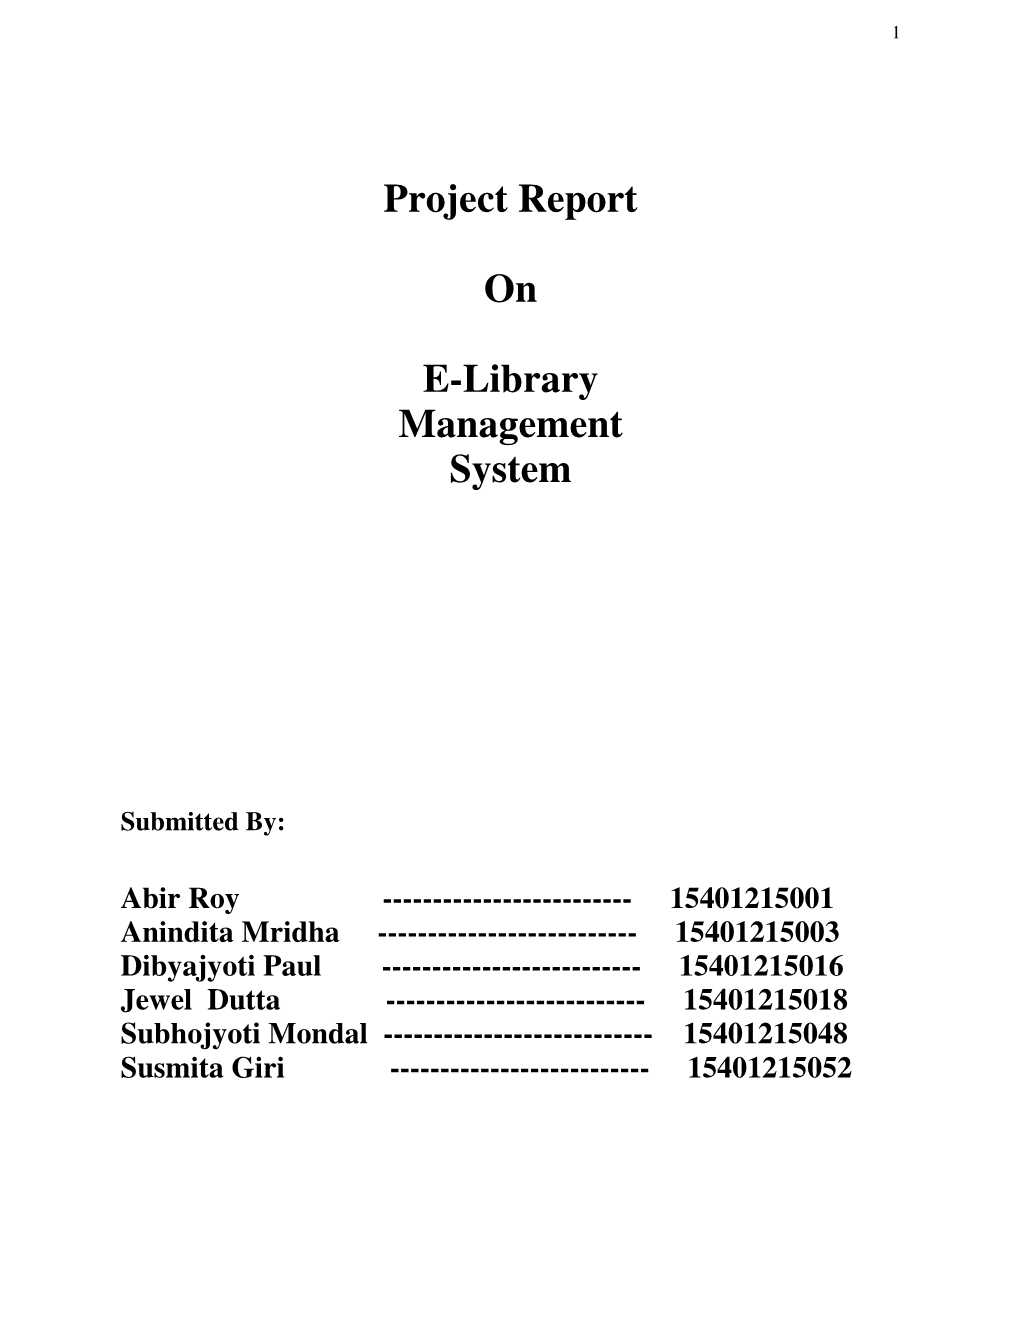 Project Report on E-Library Management System